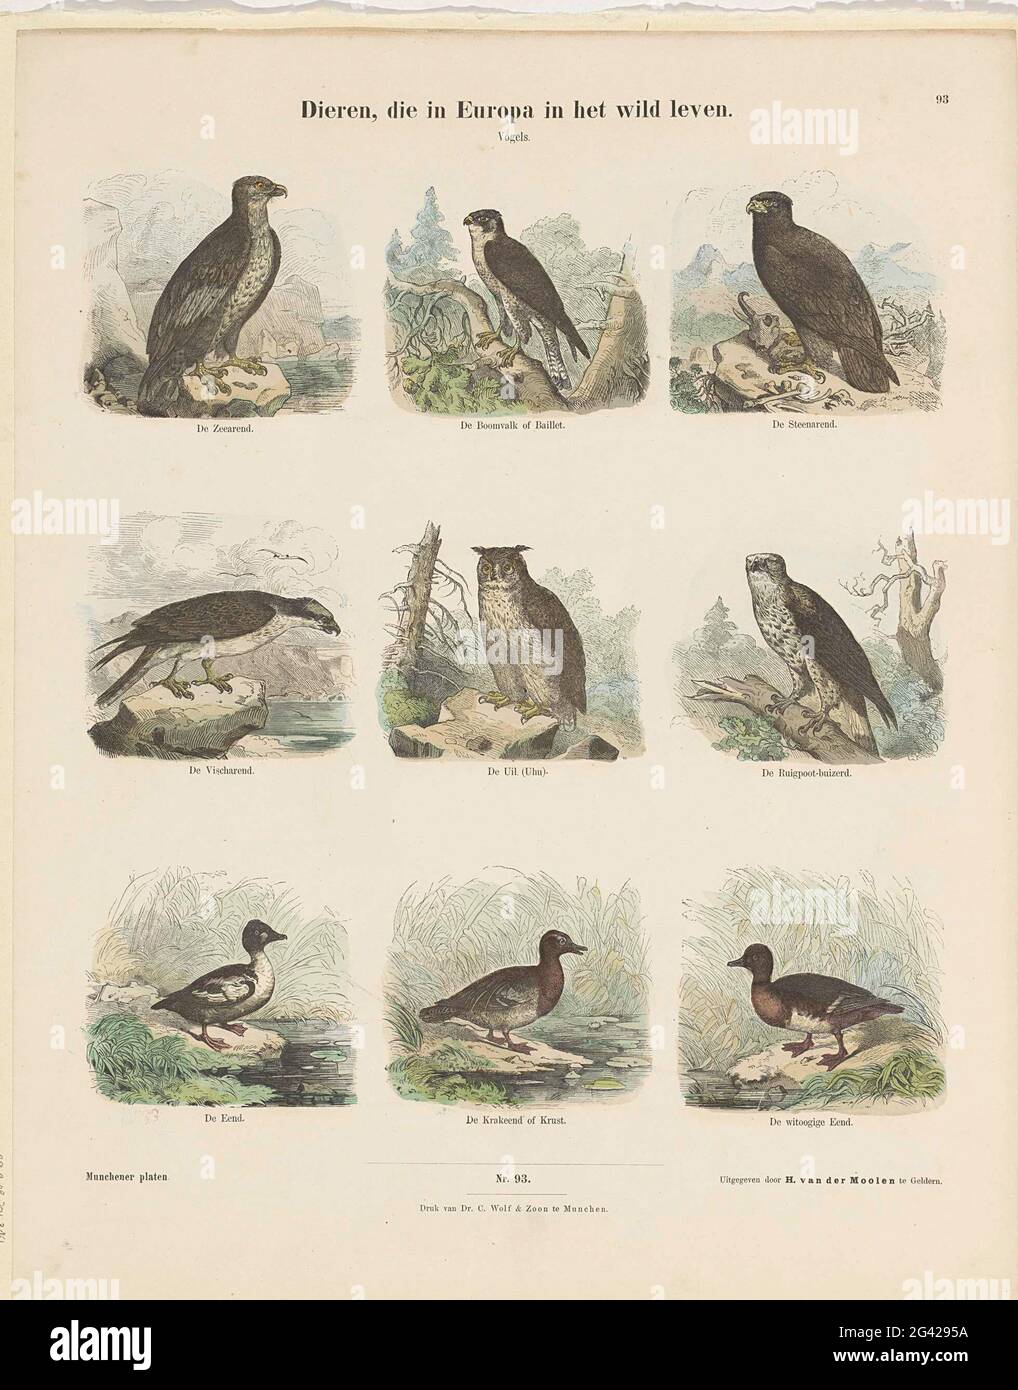 Animals, living in the wild; Munchener plates. Leaf with 9 representations of birds, including a bald eagle, a bricking, an owl and ducks. Under the images a caption. Numbered in the middle of: Nro. 93. Numbered at the top right: 93. Stock Photo